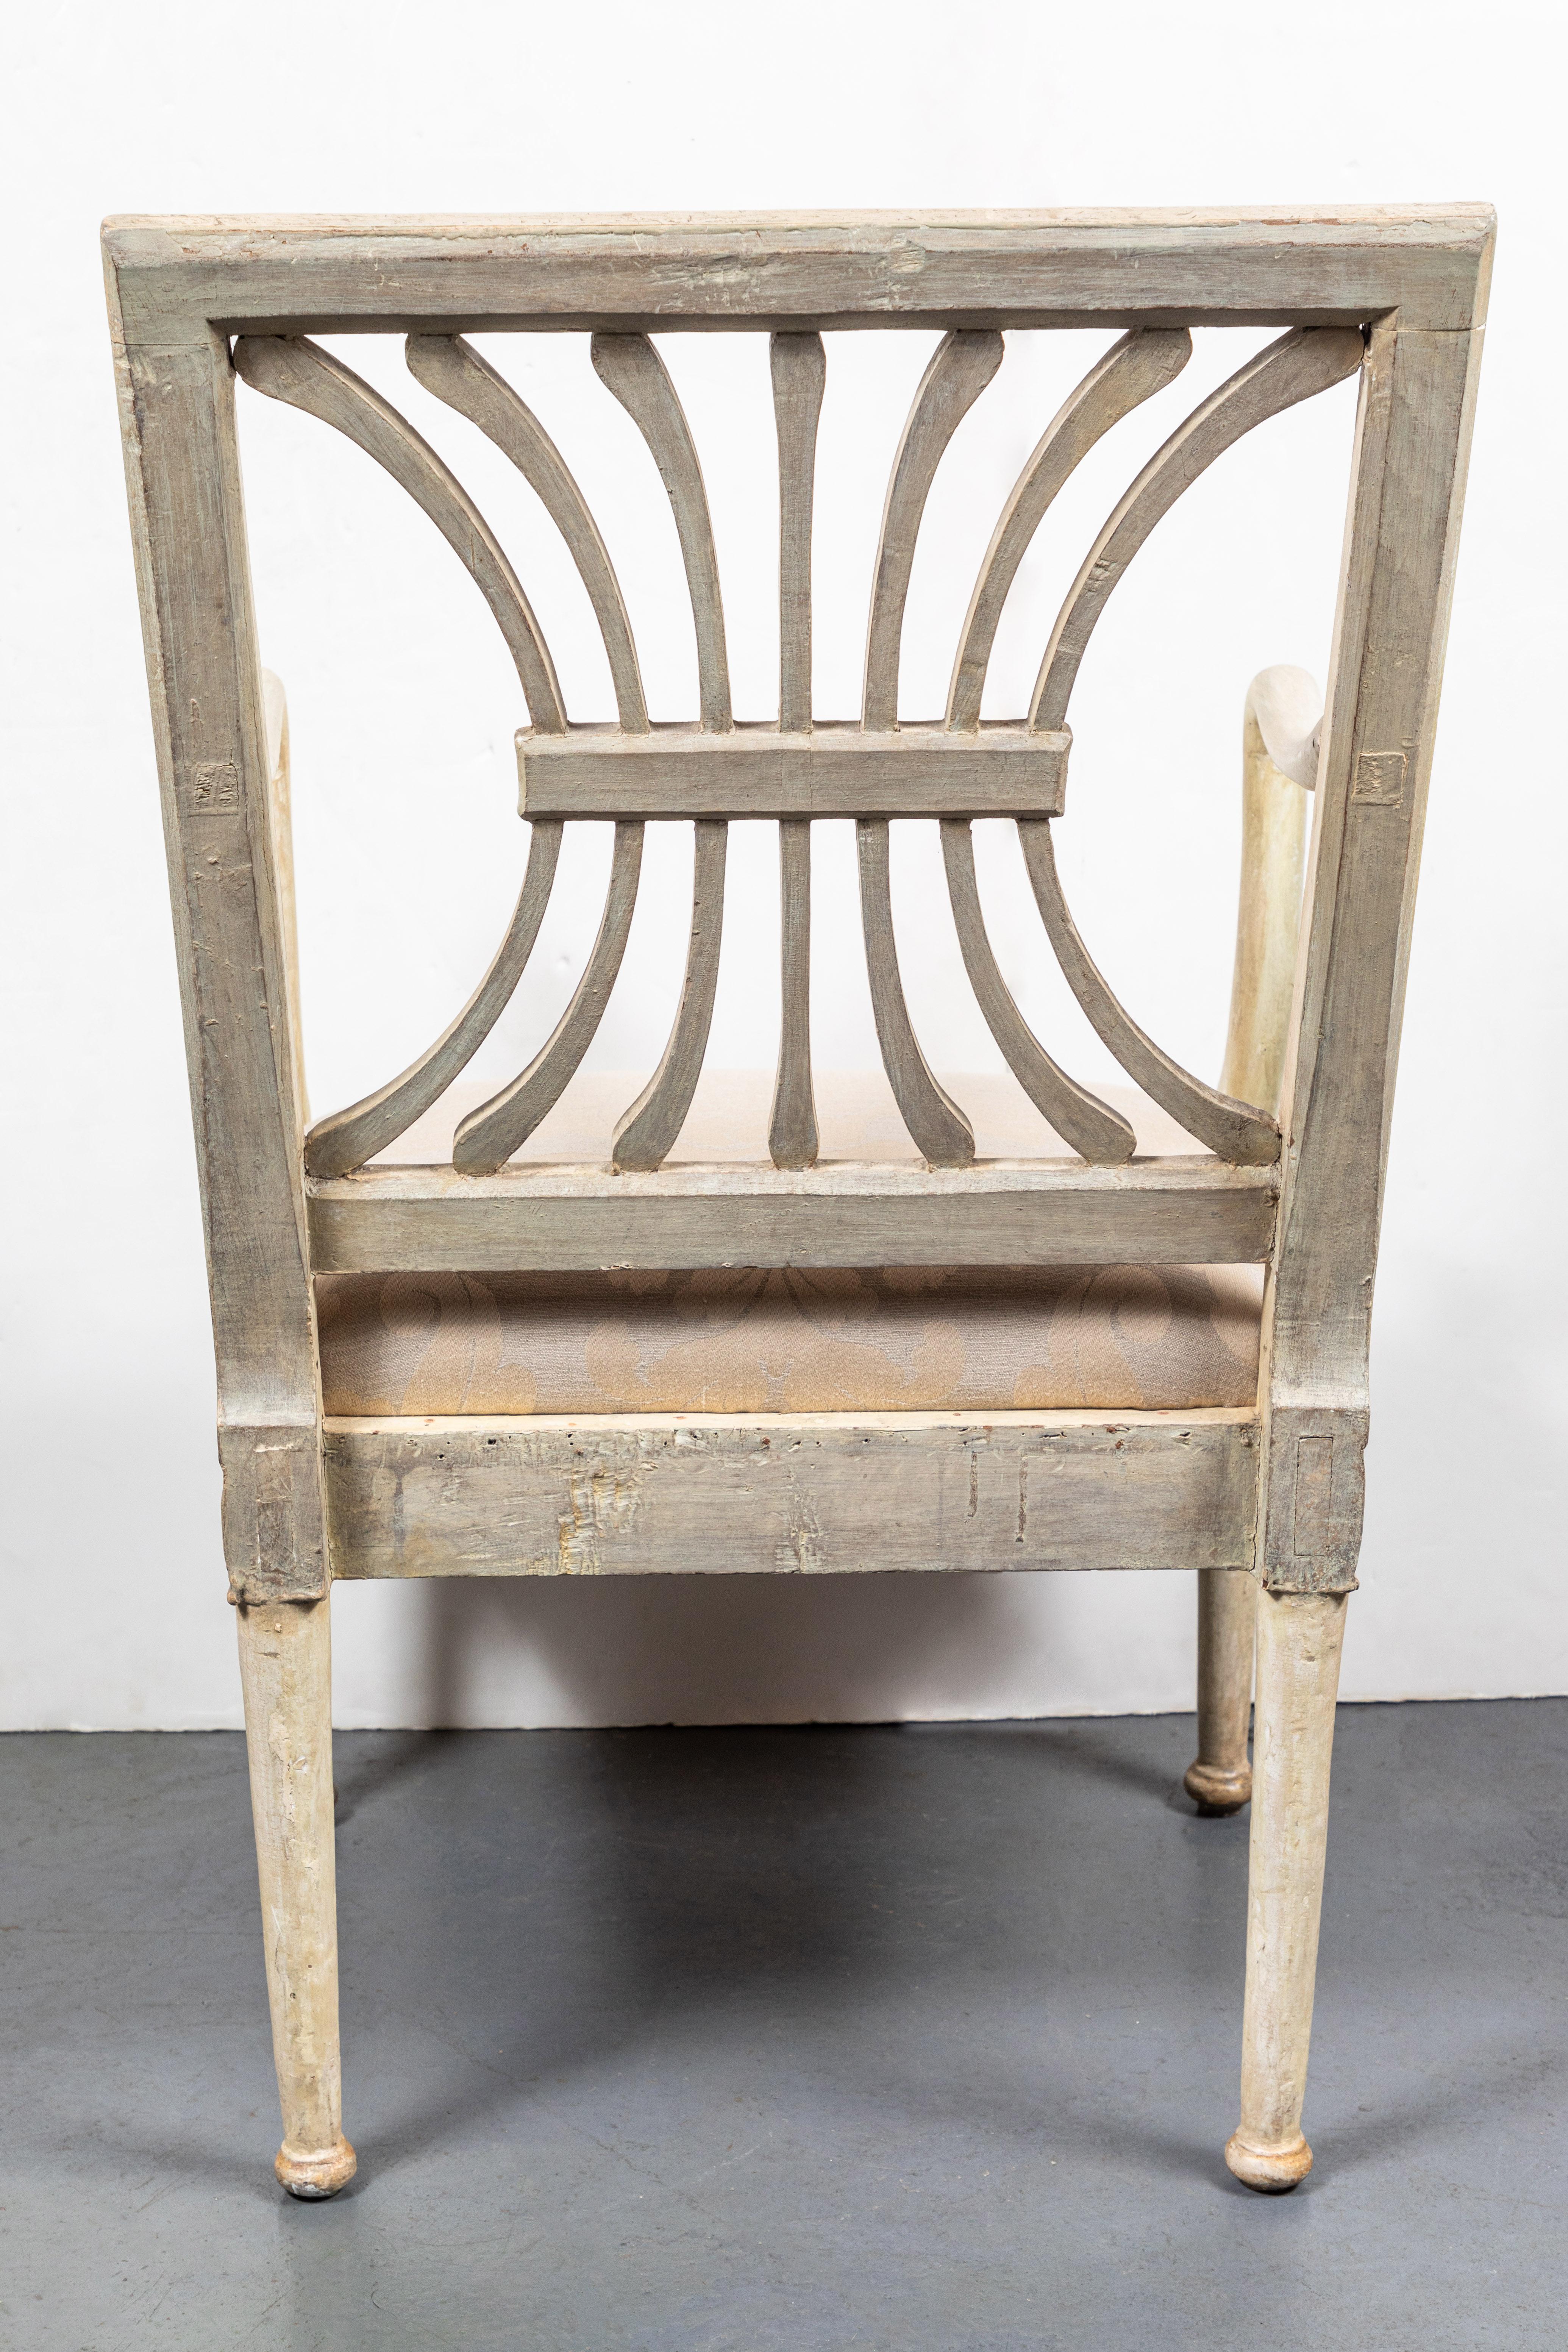 Suite of Antique Painted Chairs In Good Condition For Sale In Newport Beach, CA